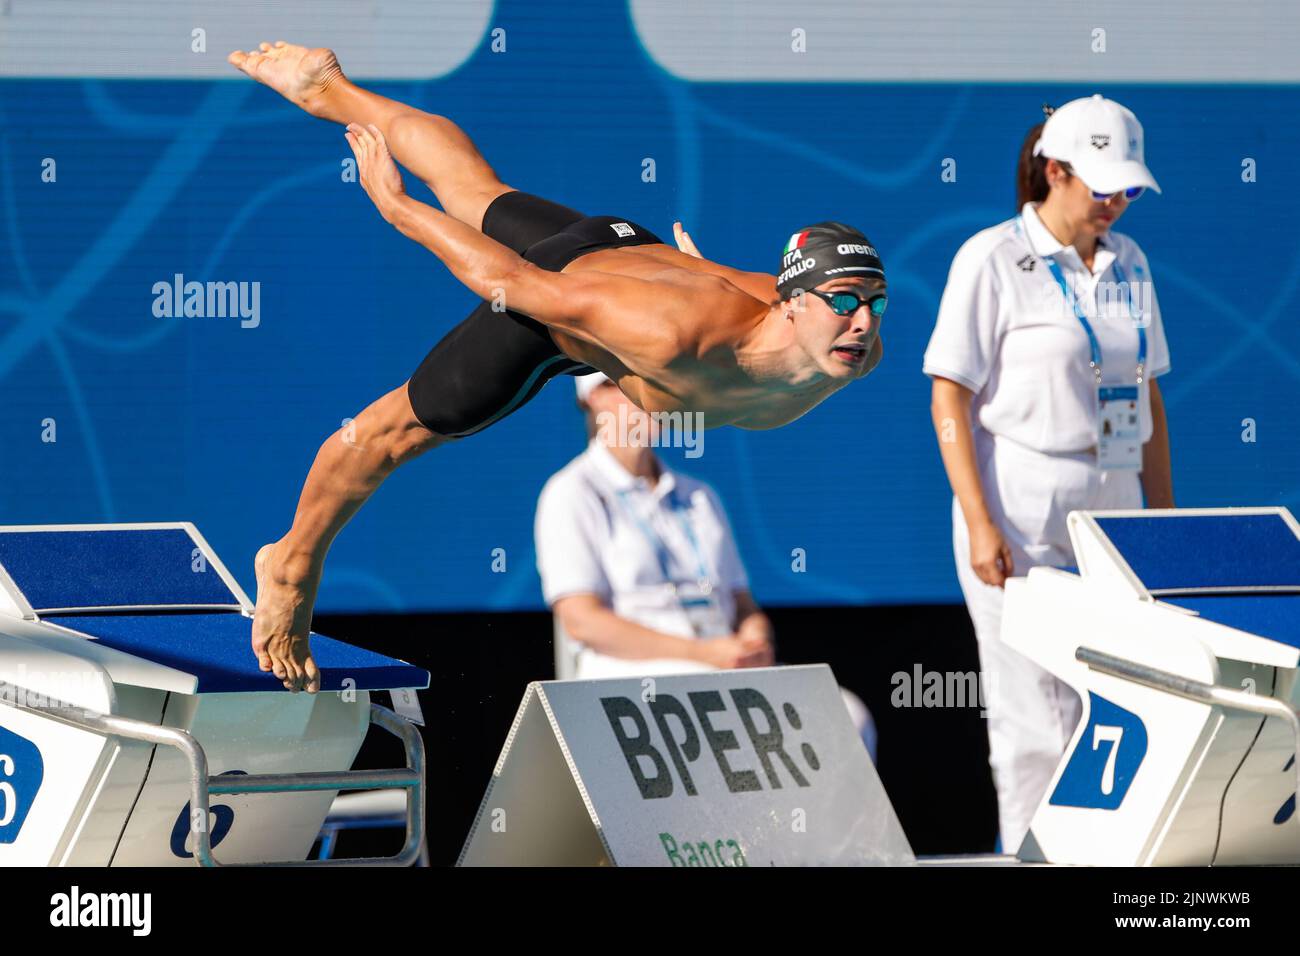 Rome, Italy. 14th Aug, 2022. ROME, ITALY - AUGUST 14: Marco De Tullio of Italy during the Men's 200m Freestyle at the European Aquatics Roma 2022 at Stadio del Nuoto on August 14, 2022 in Rome, Italy (Photo by Nikola Krstic/Orange Pictures) Credit: Orange Pics BV/Alamy Live News Stock Photo